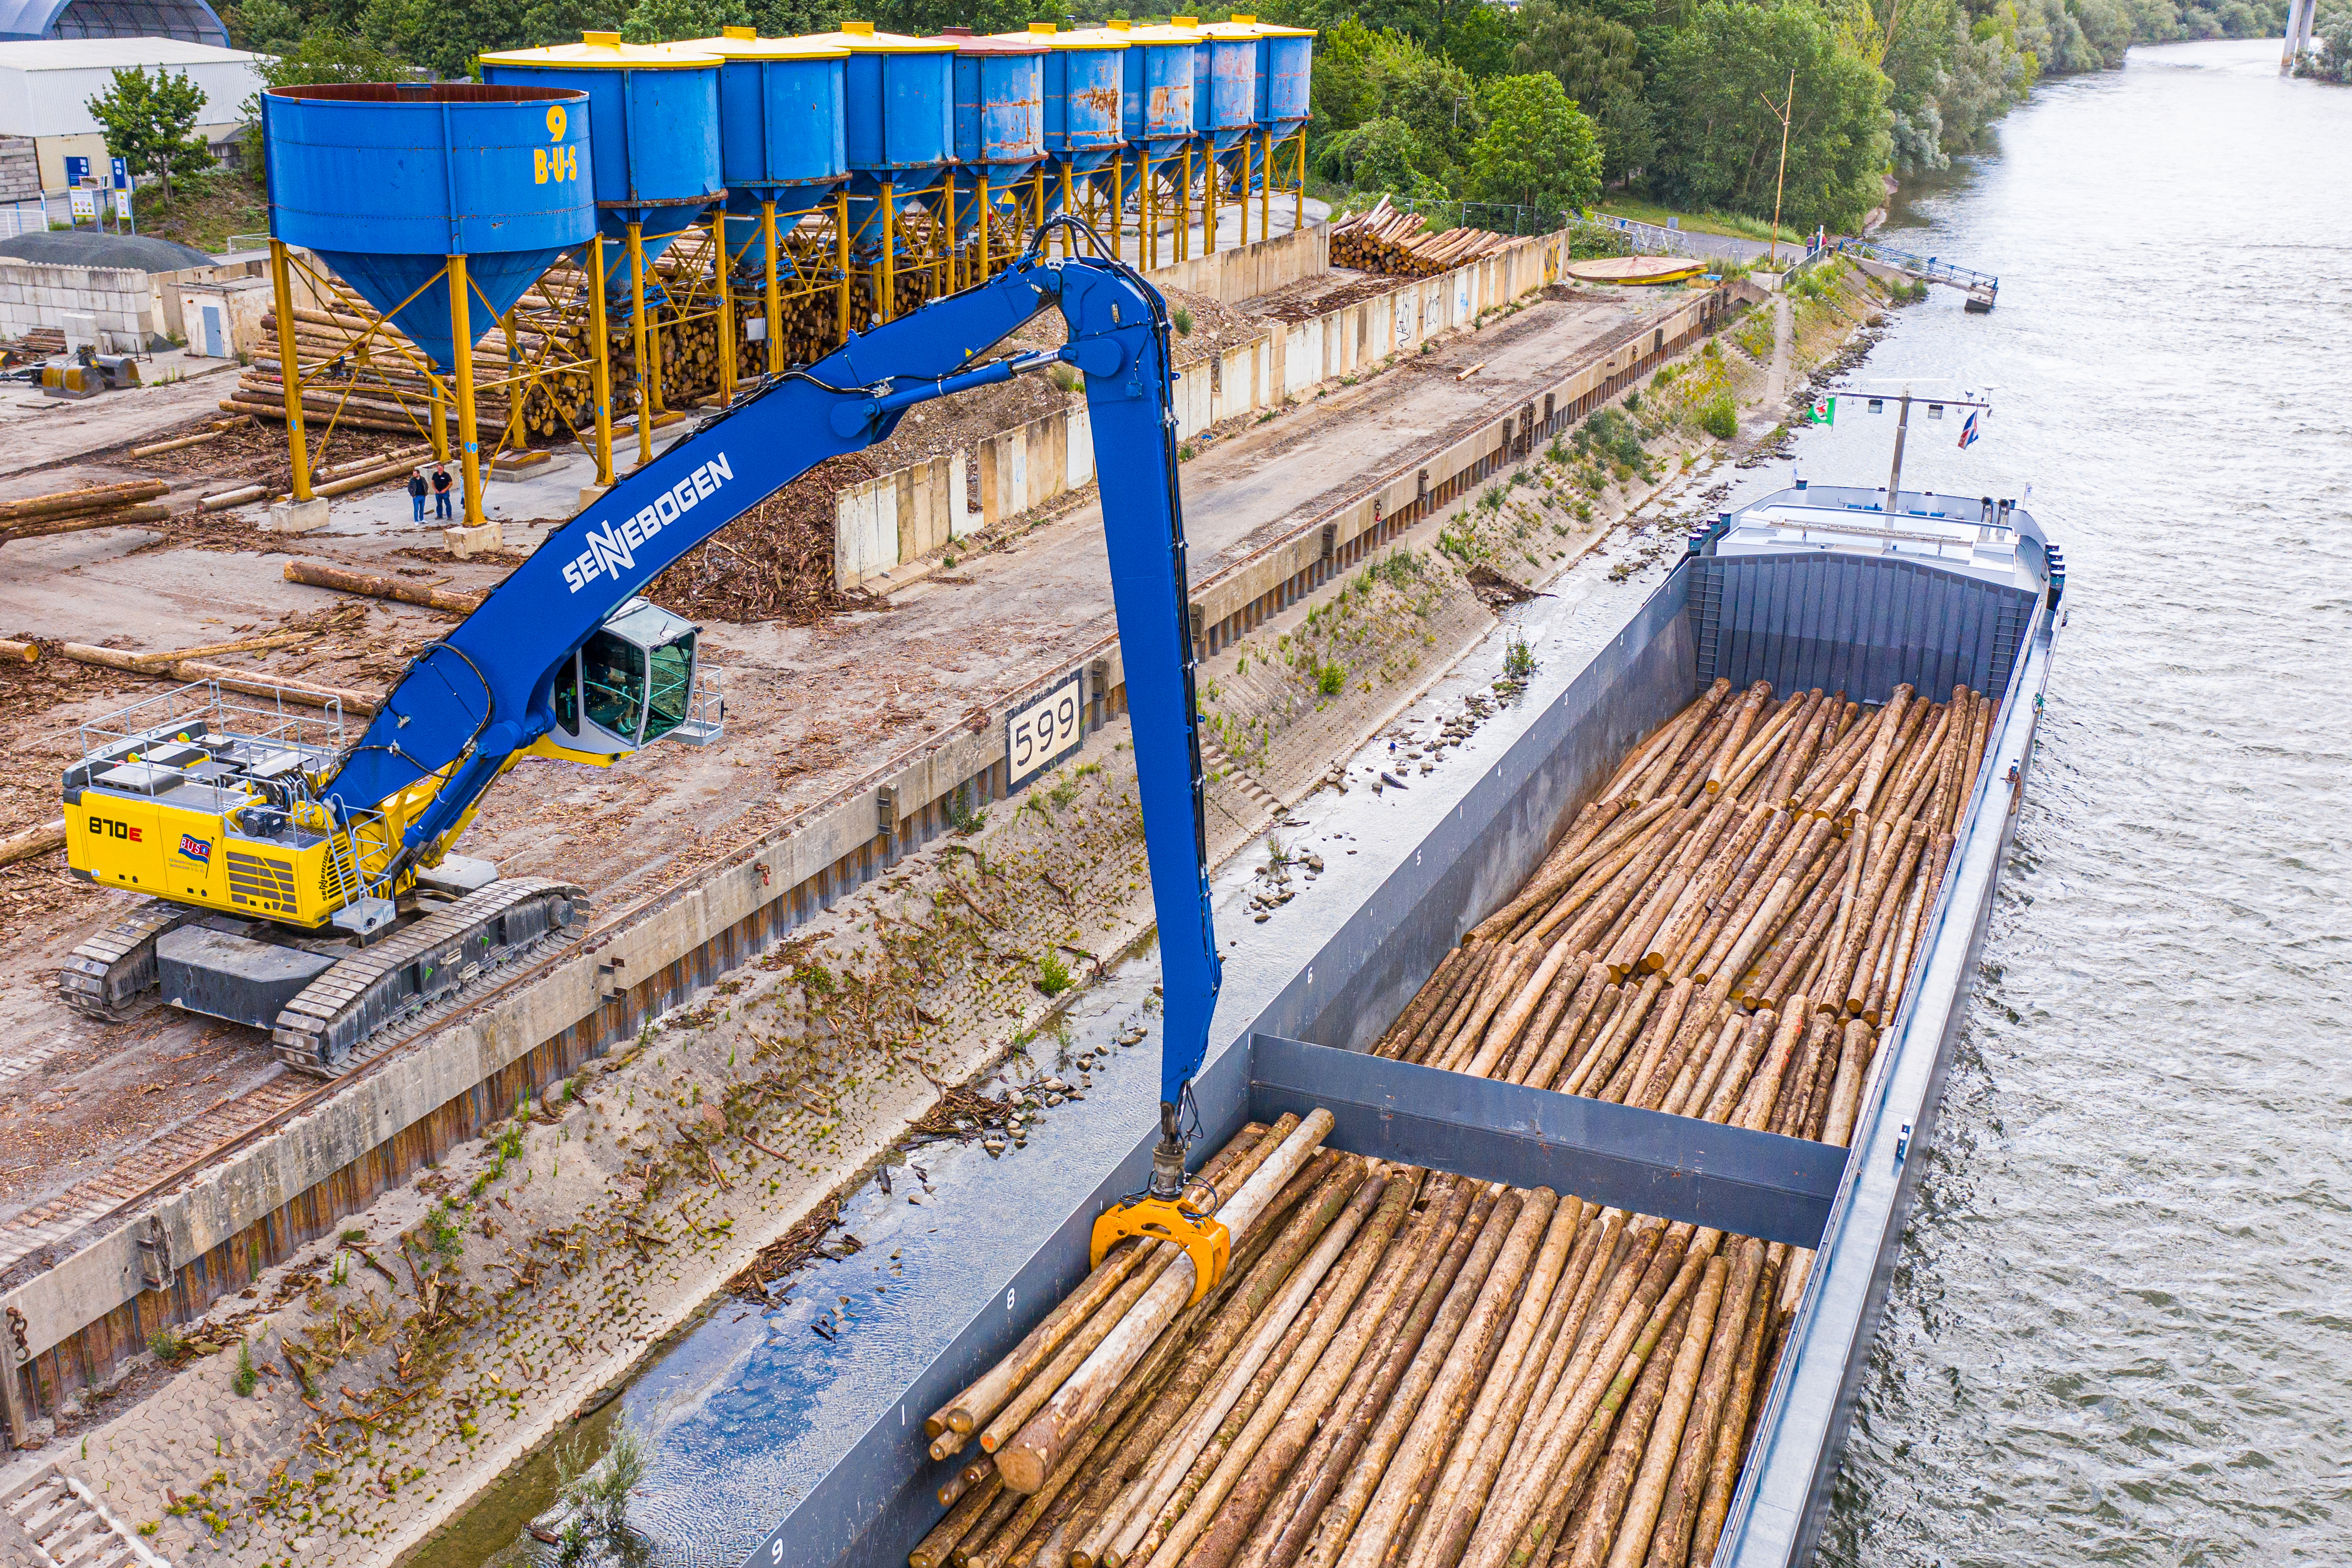 Material handler SENNEBOGEN 870 Hybrid with 25 m equipment for loading ships even at low water – particularly high stability is ensured by the heavy and wide crawler undercarriage.